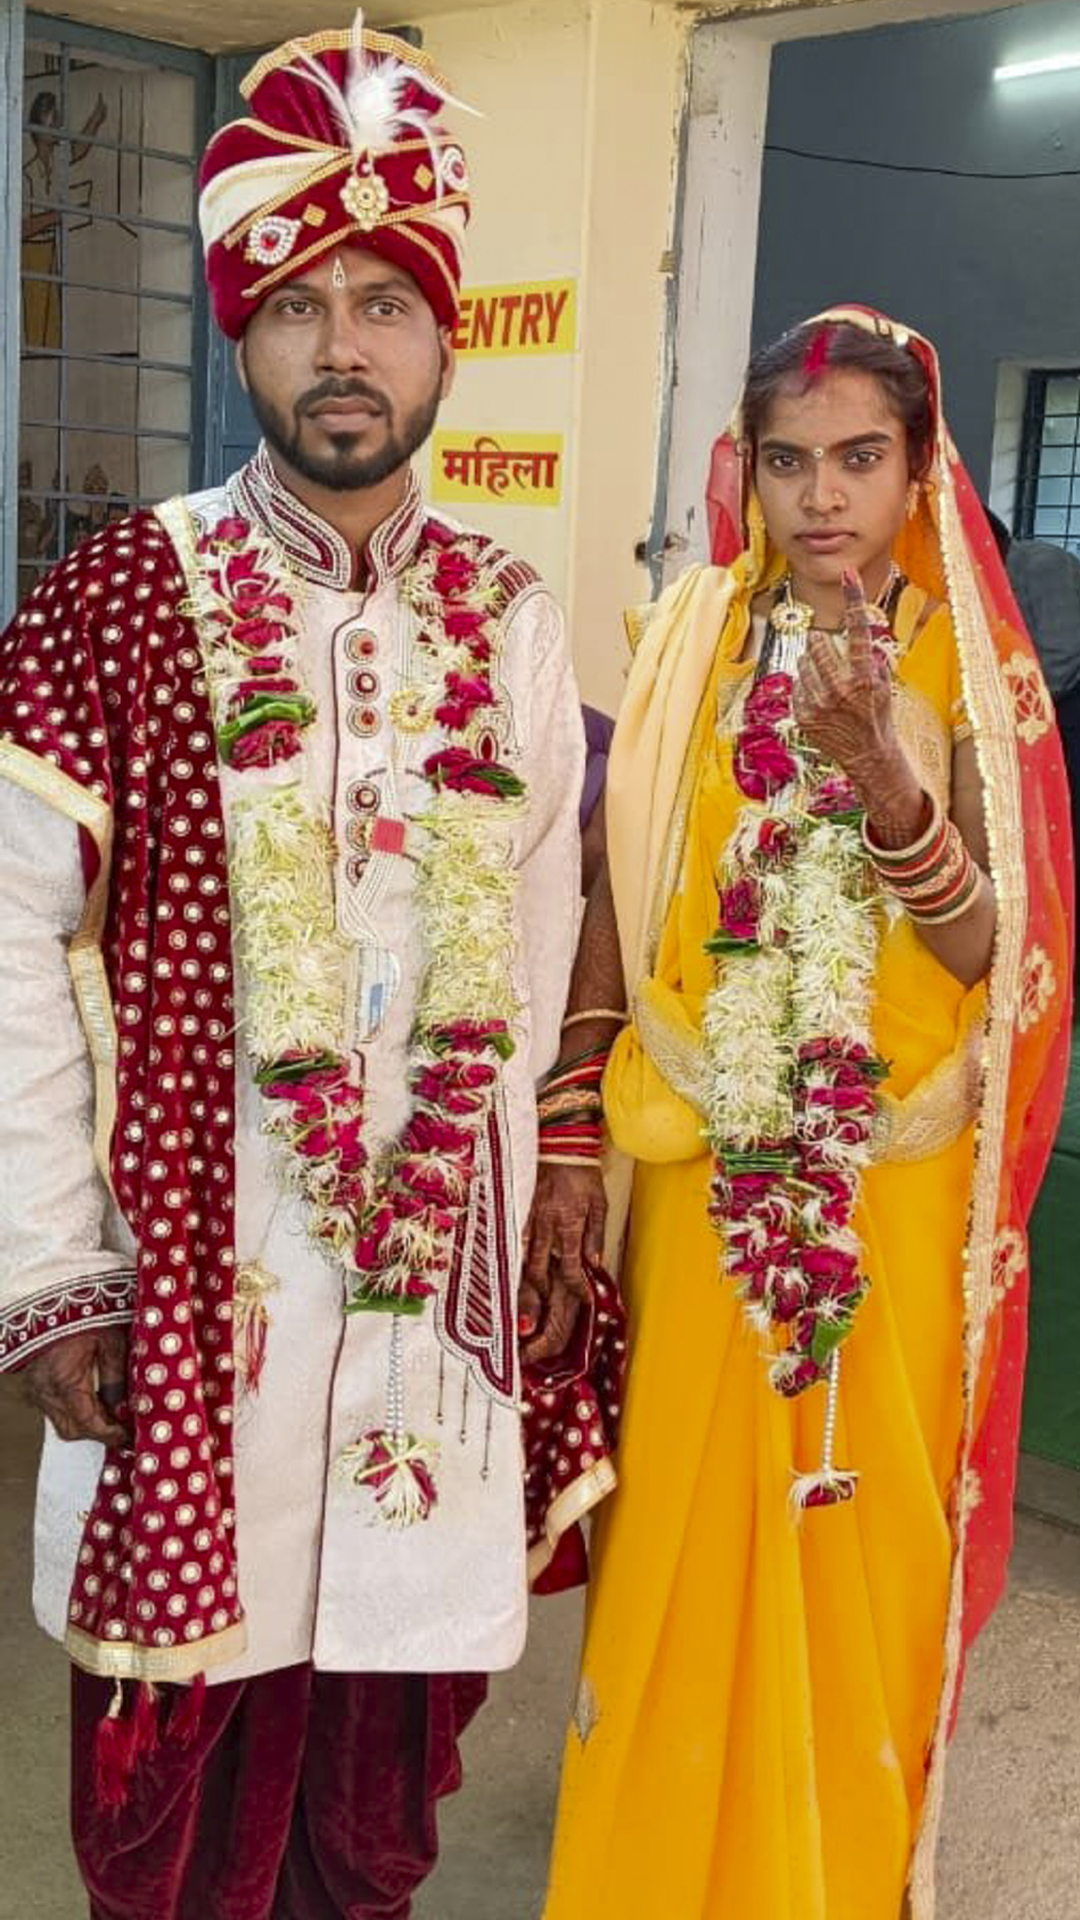 A newly-wedded couple at a polling station after casting their votes for the first phase of Lok Sabha elections in Balaghat district,